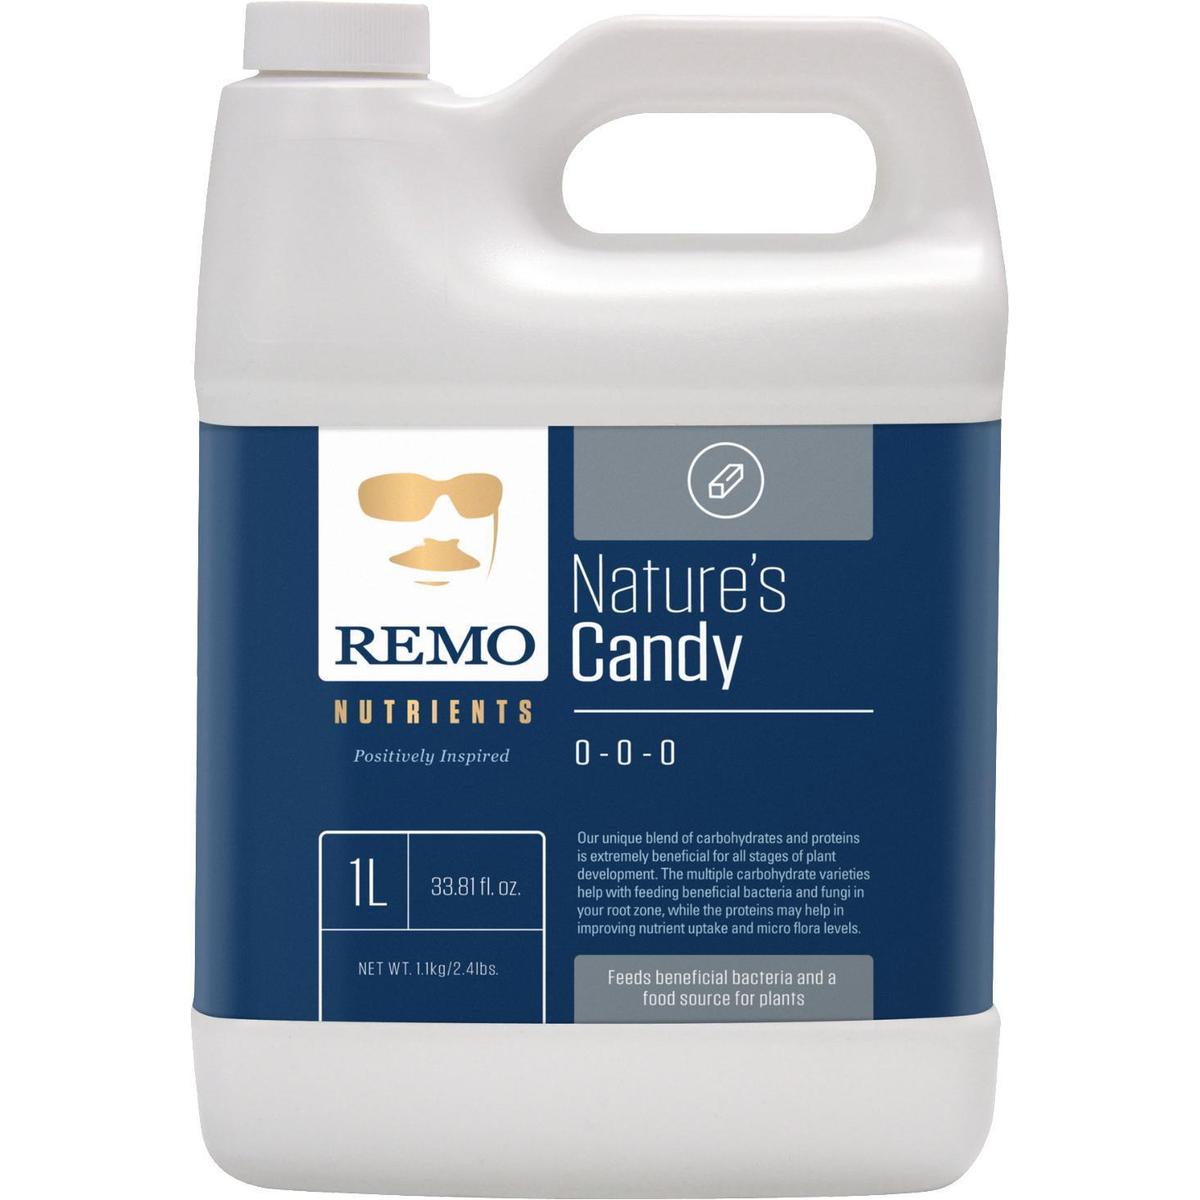 Remo-Nutrients-Natures-Candy-1L